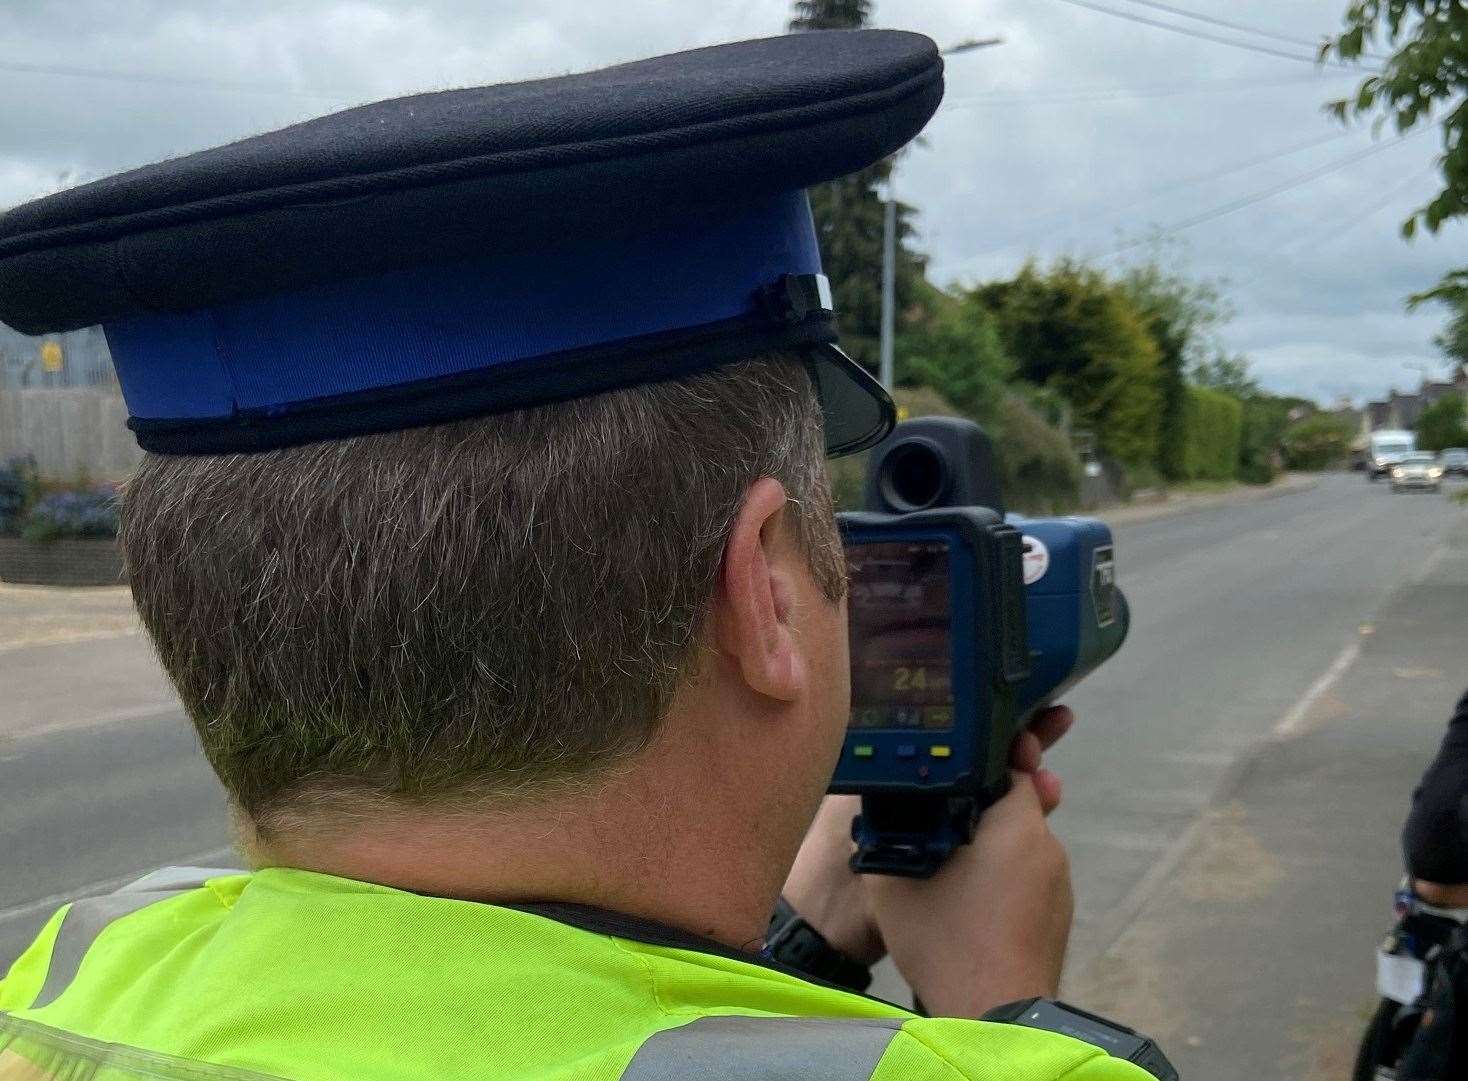 Safety Partnerships, between local authorities and the police, are often involved in the operation of cameras